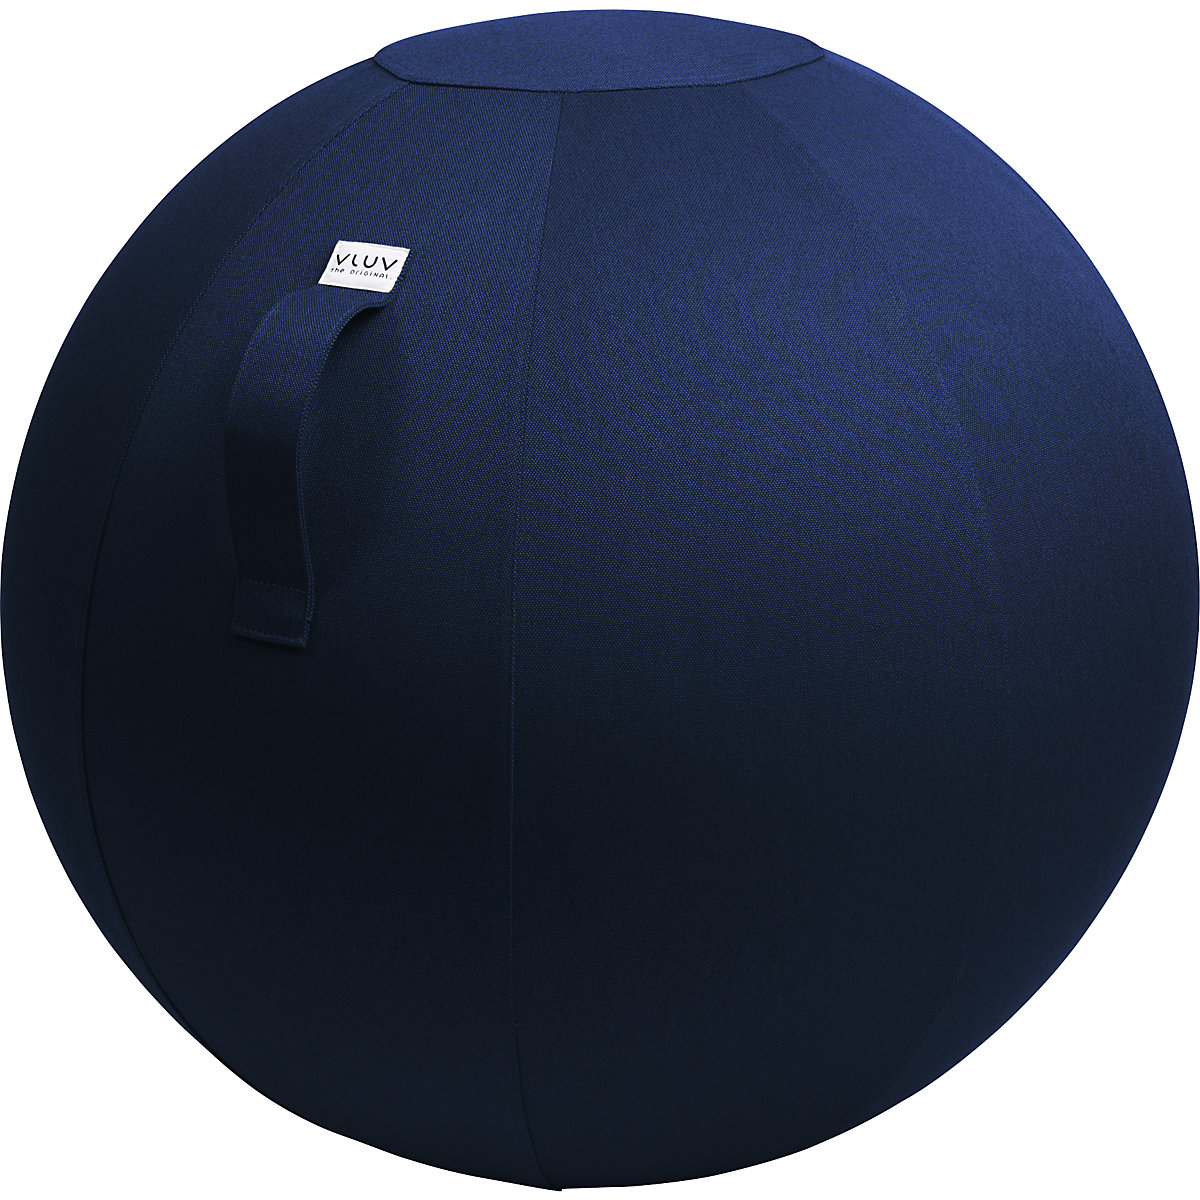 Fitball LEIV – VLUV, rivestimento in tessuto effetto canvas, 700 – 750 mm, blu reale-12